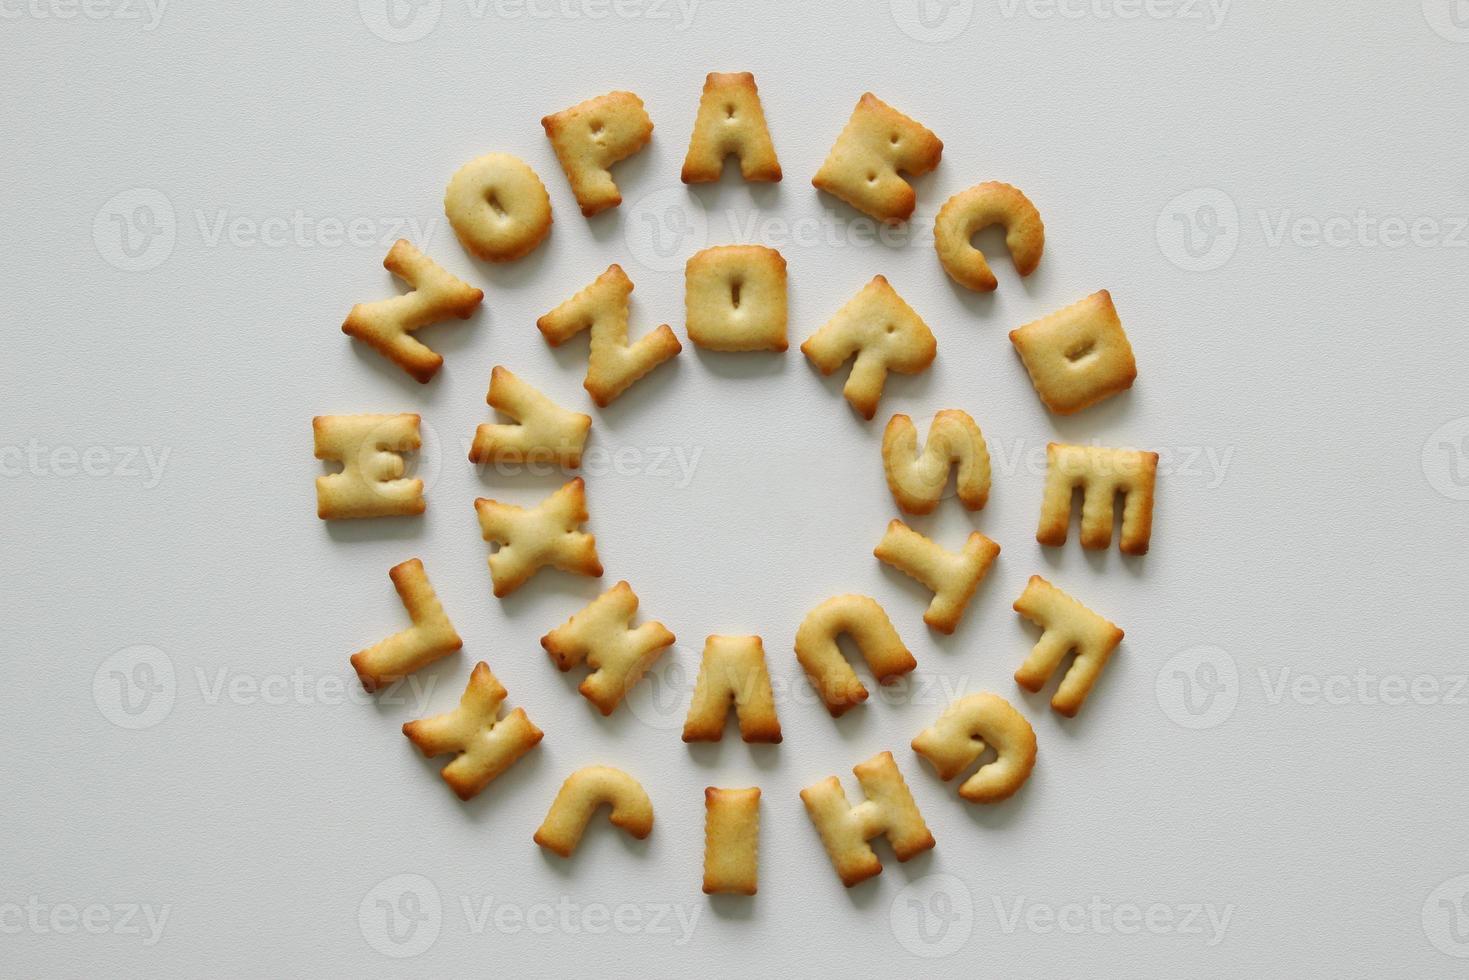 An English alphabet from the cookies in a circle on the white background. photo